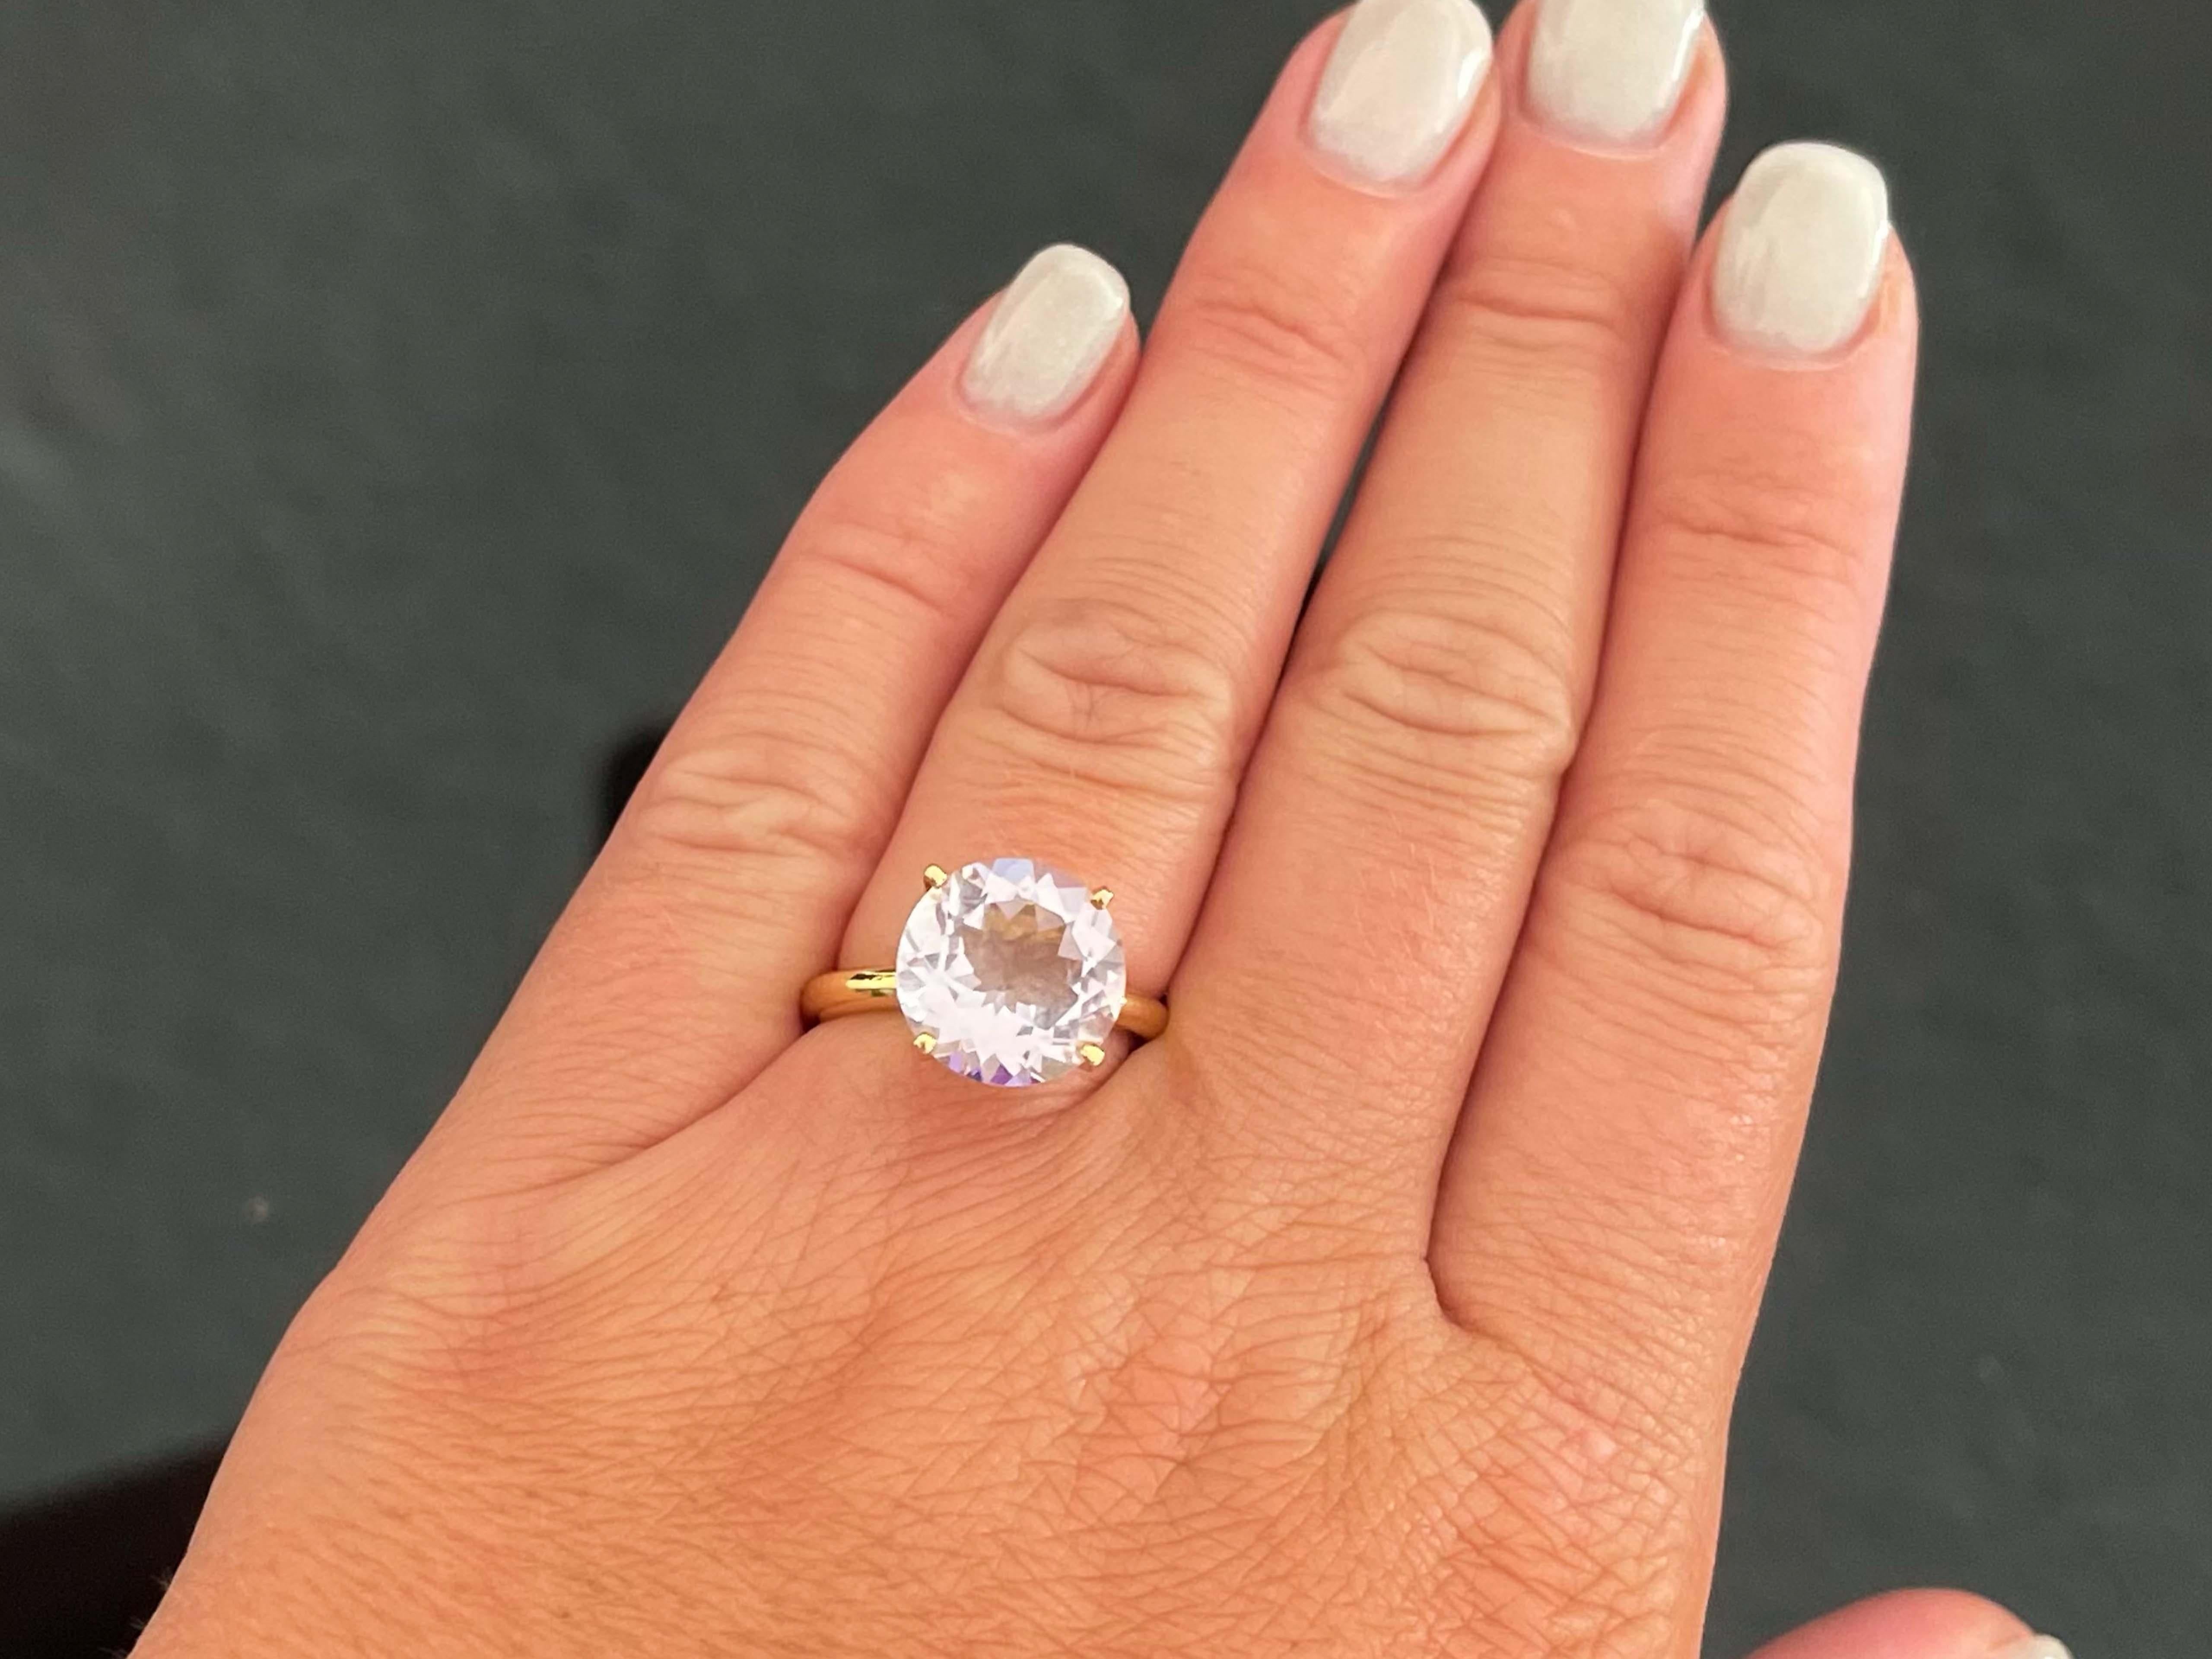 Ring Specifications:

Metal: 18k Yellow Gold

Total Weight: 6.4 Grams

Morganite Carat Weight: ~5 carats

Morganite Measurements: 12 mm x 12 mm x 6.8 mm

Ring Size: 5.75 (resizable)

Stamped: 